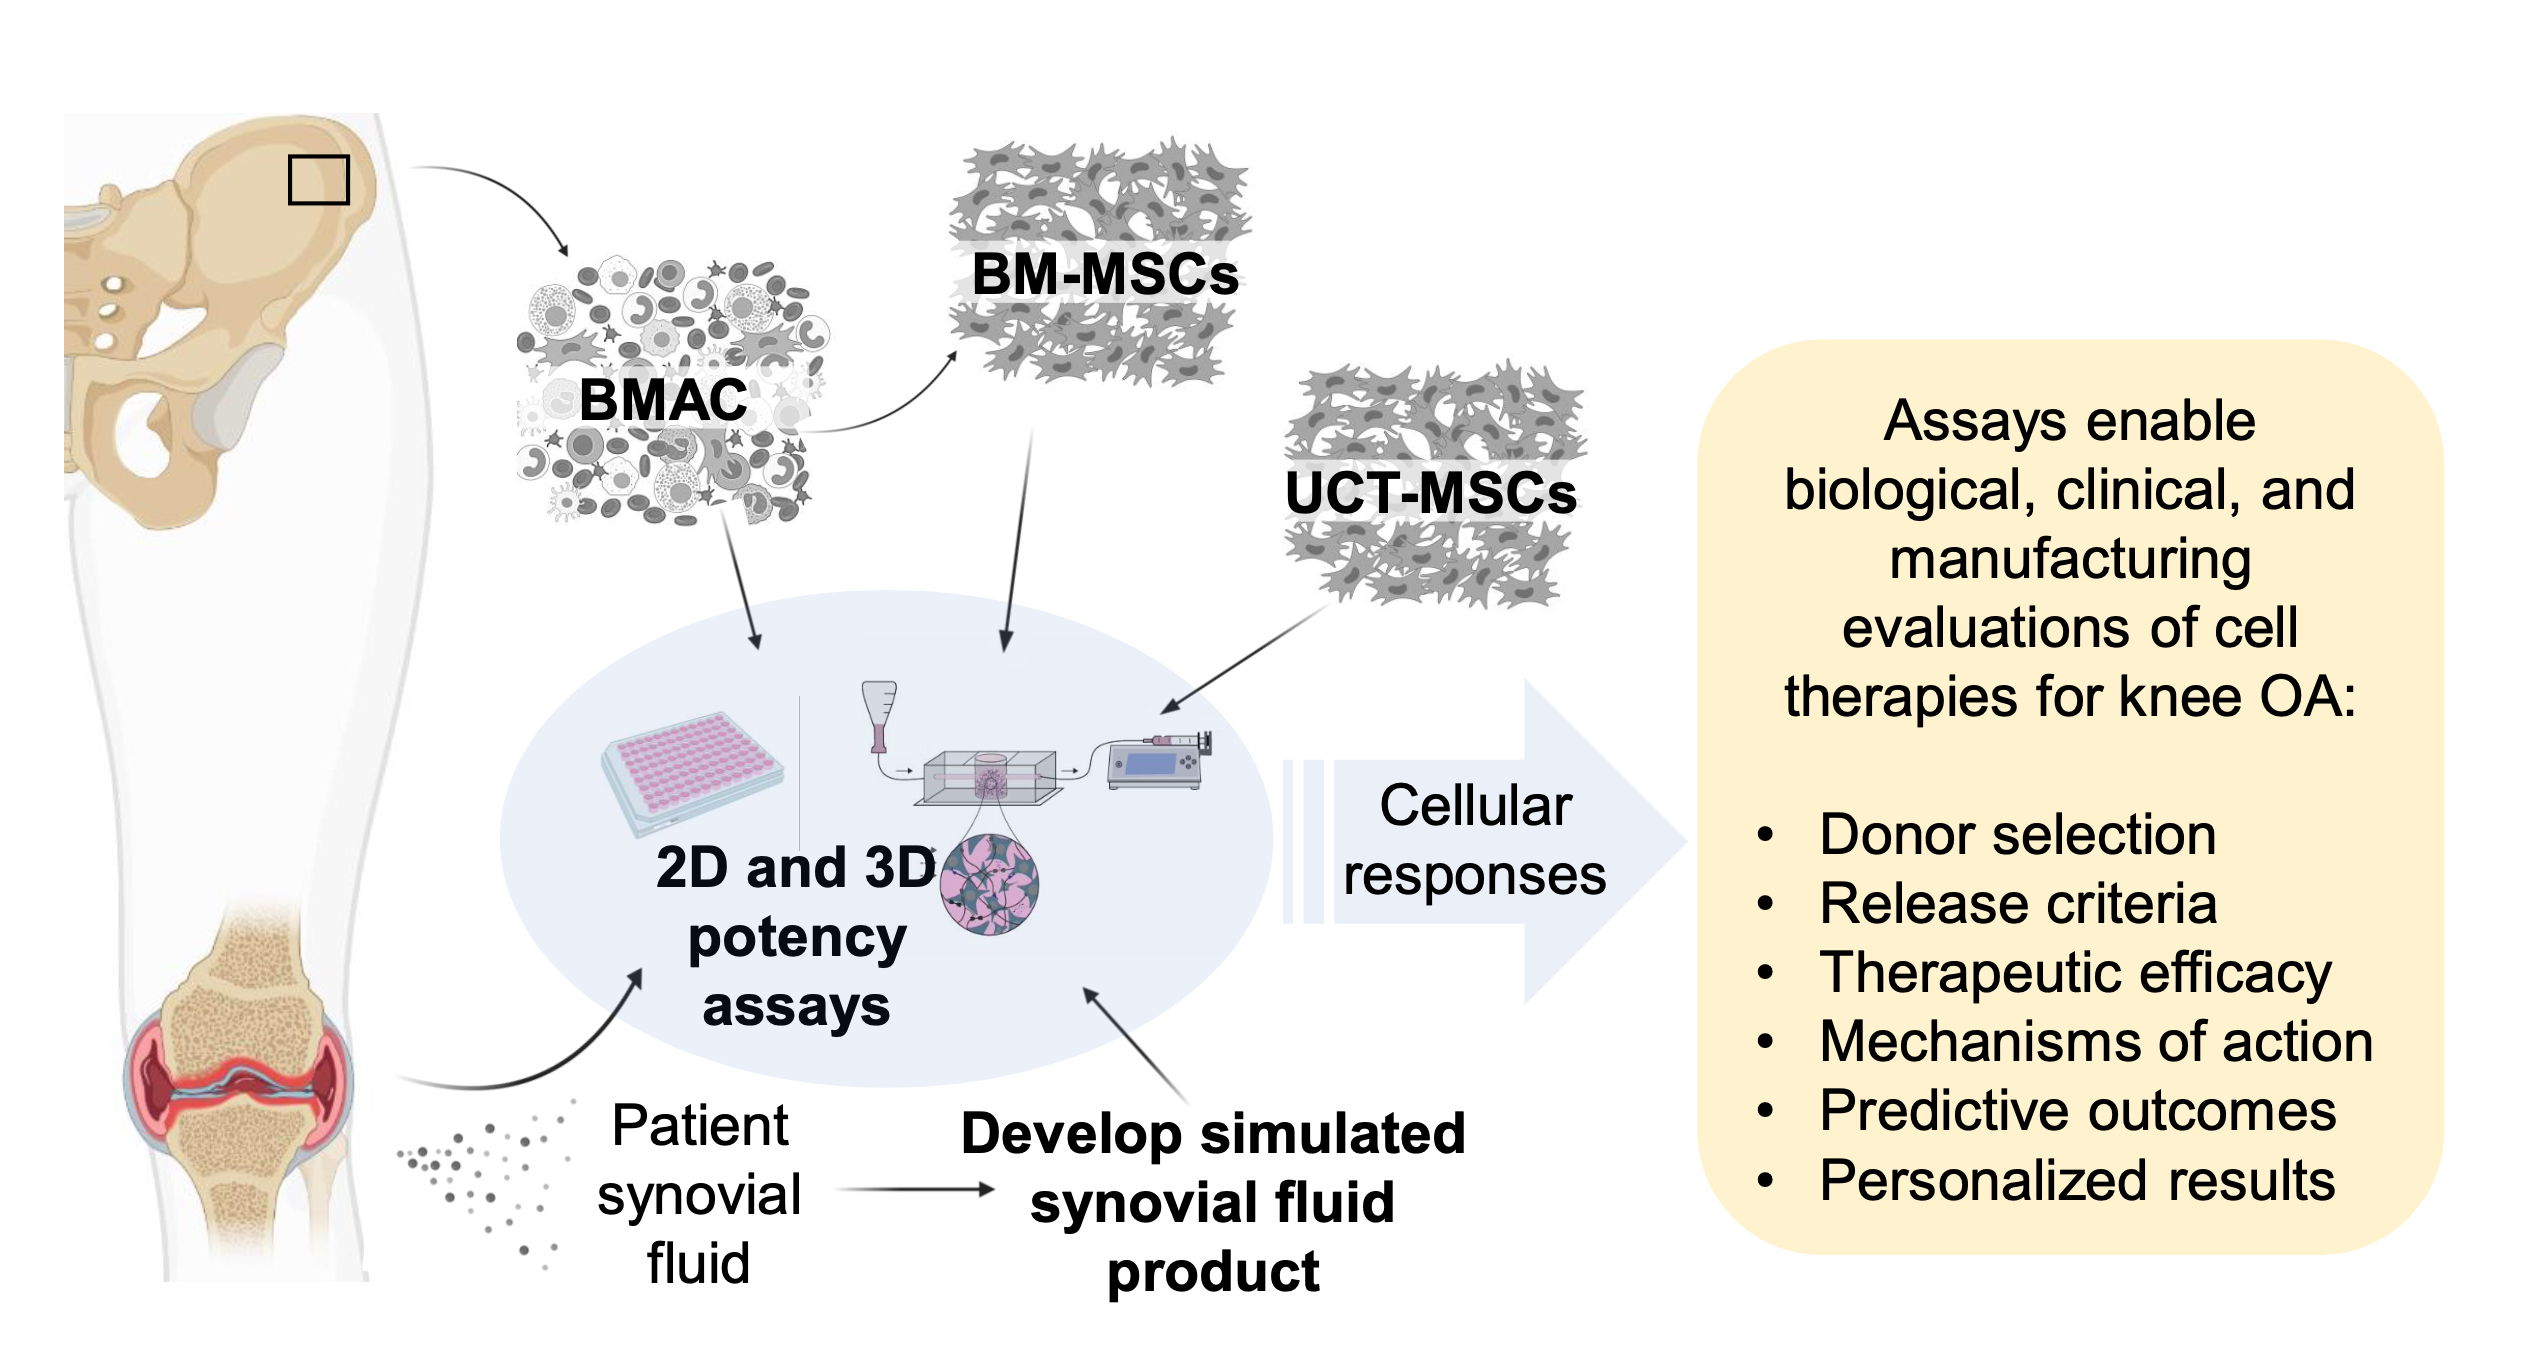 Workflow illustrates the process: “patient synovial fluid” with arrow to “develop simulated synovial fluid product” and arrow to image of “2D and 3D potency assays.” 